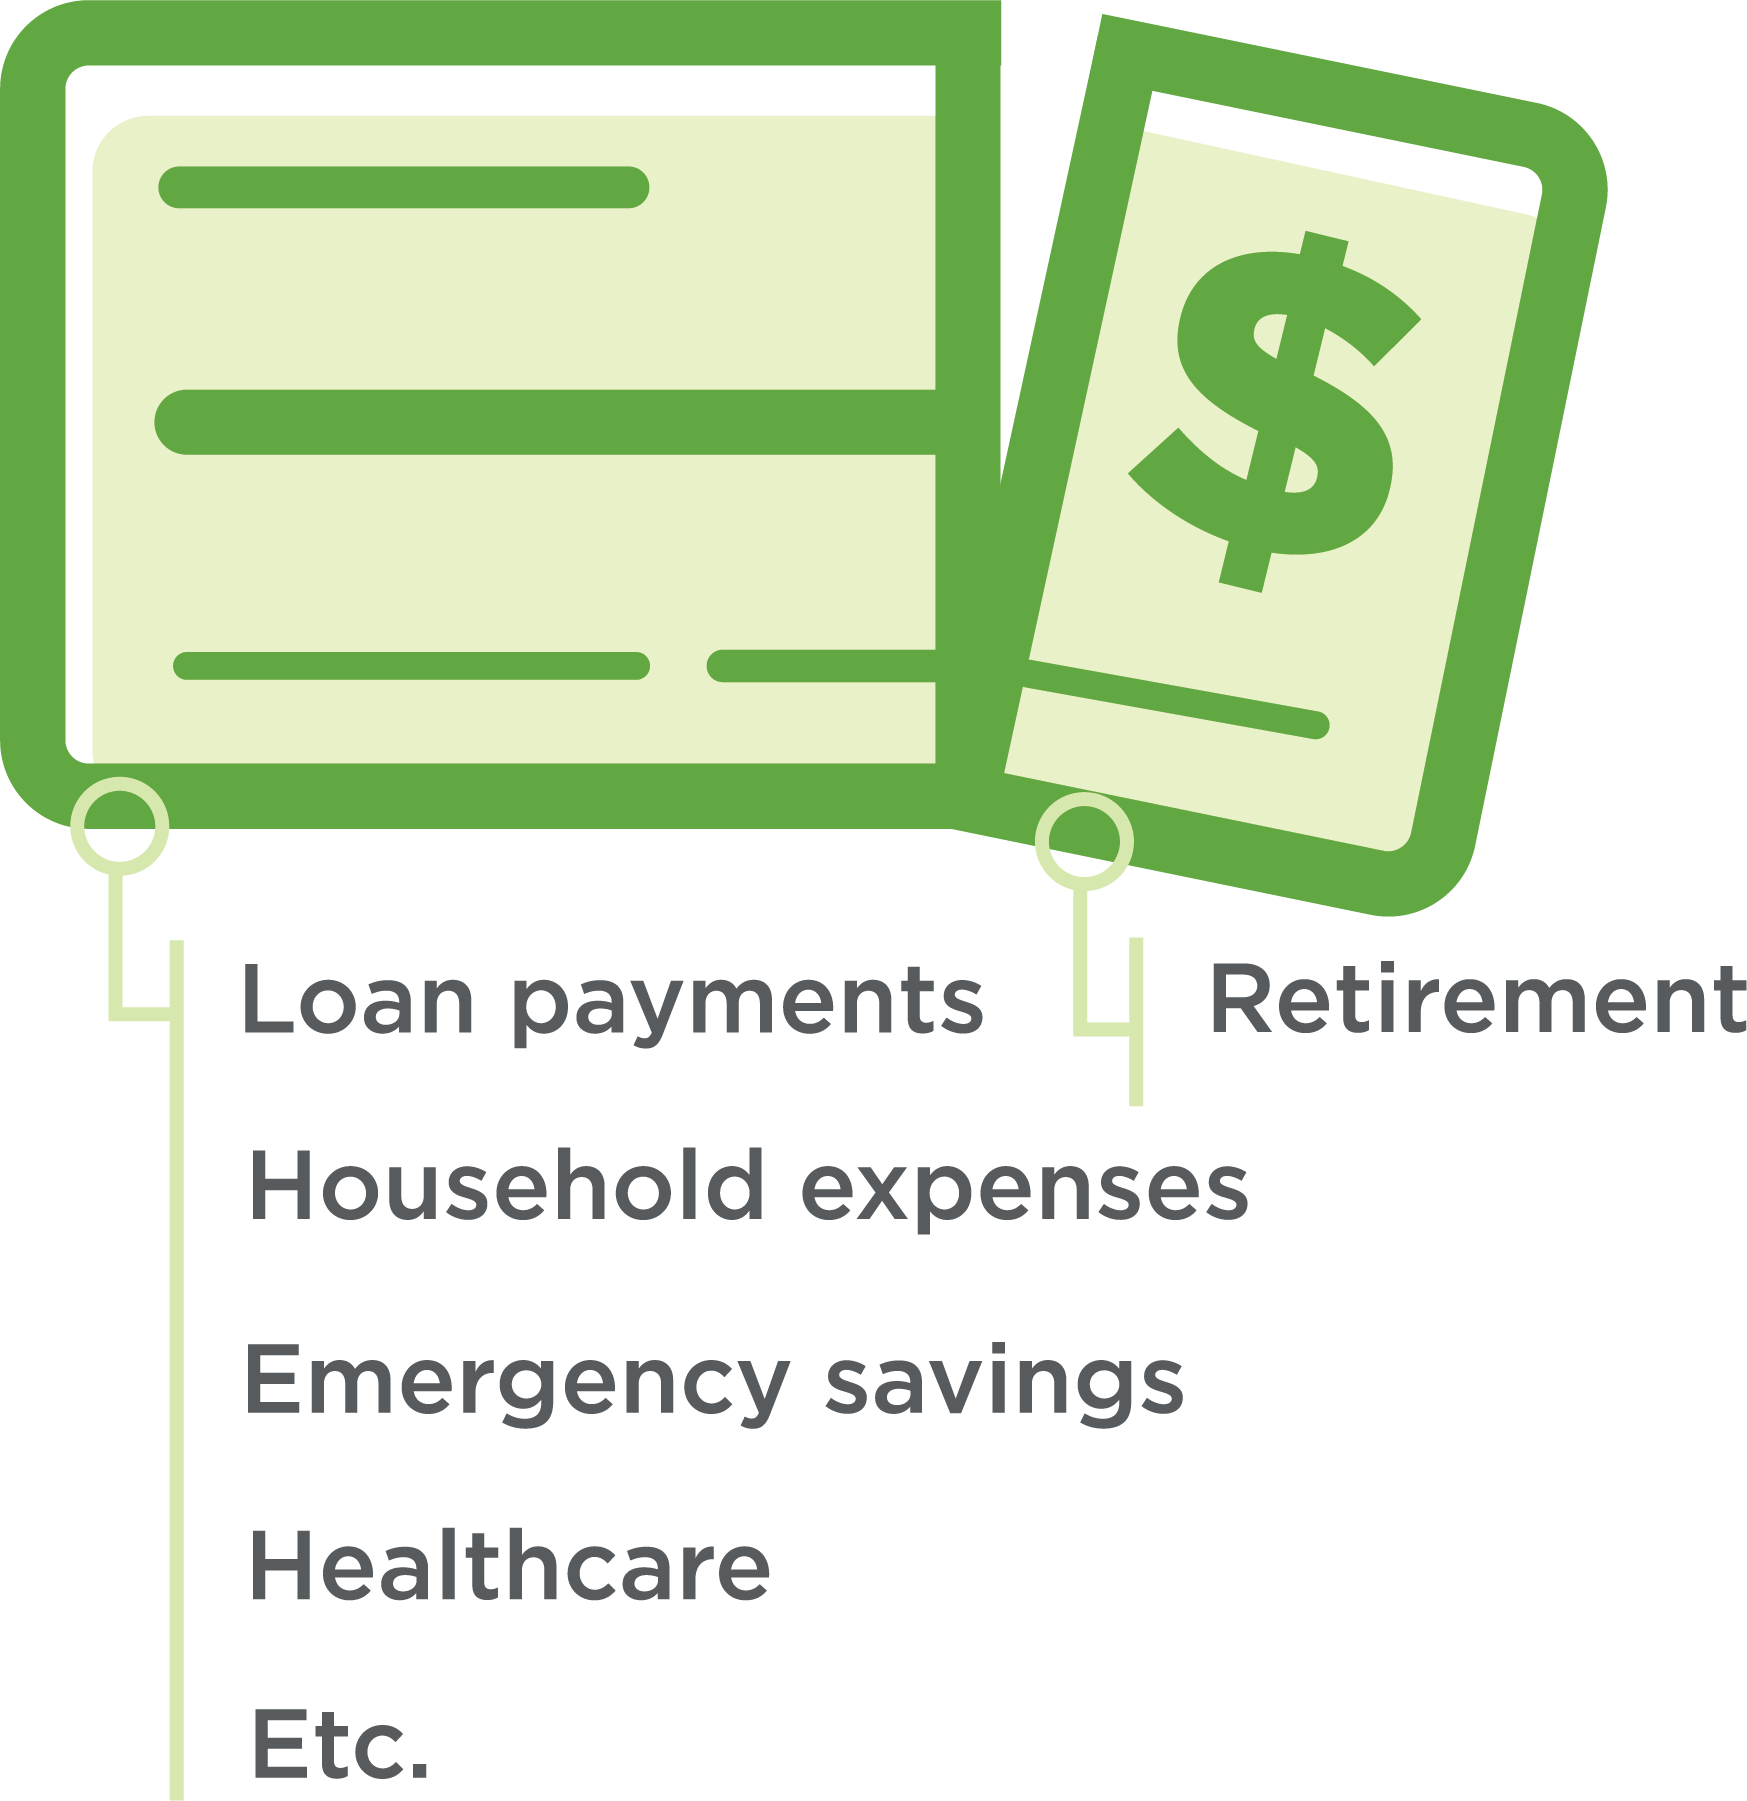 Loan payments, household expenses, emergency value, healthcare, retirement